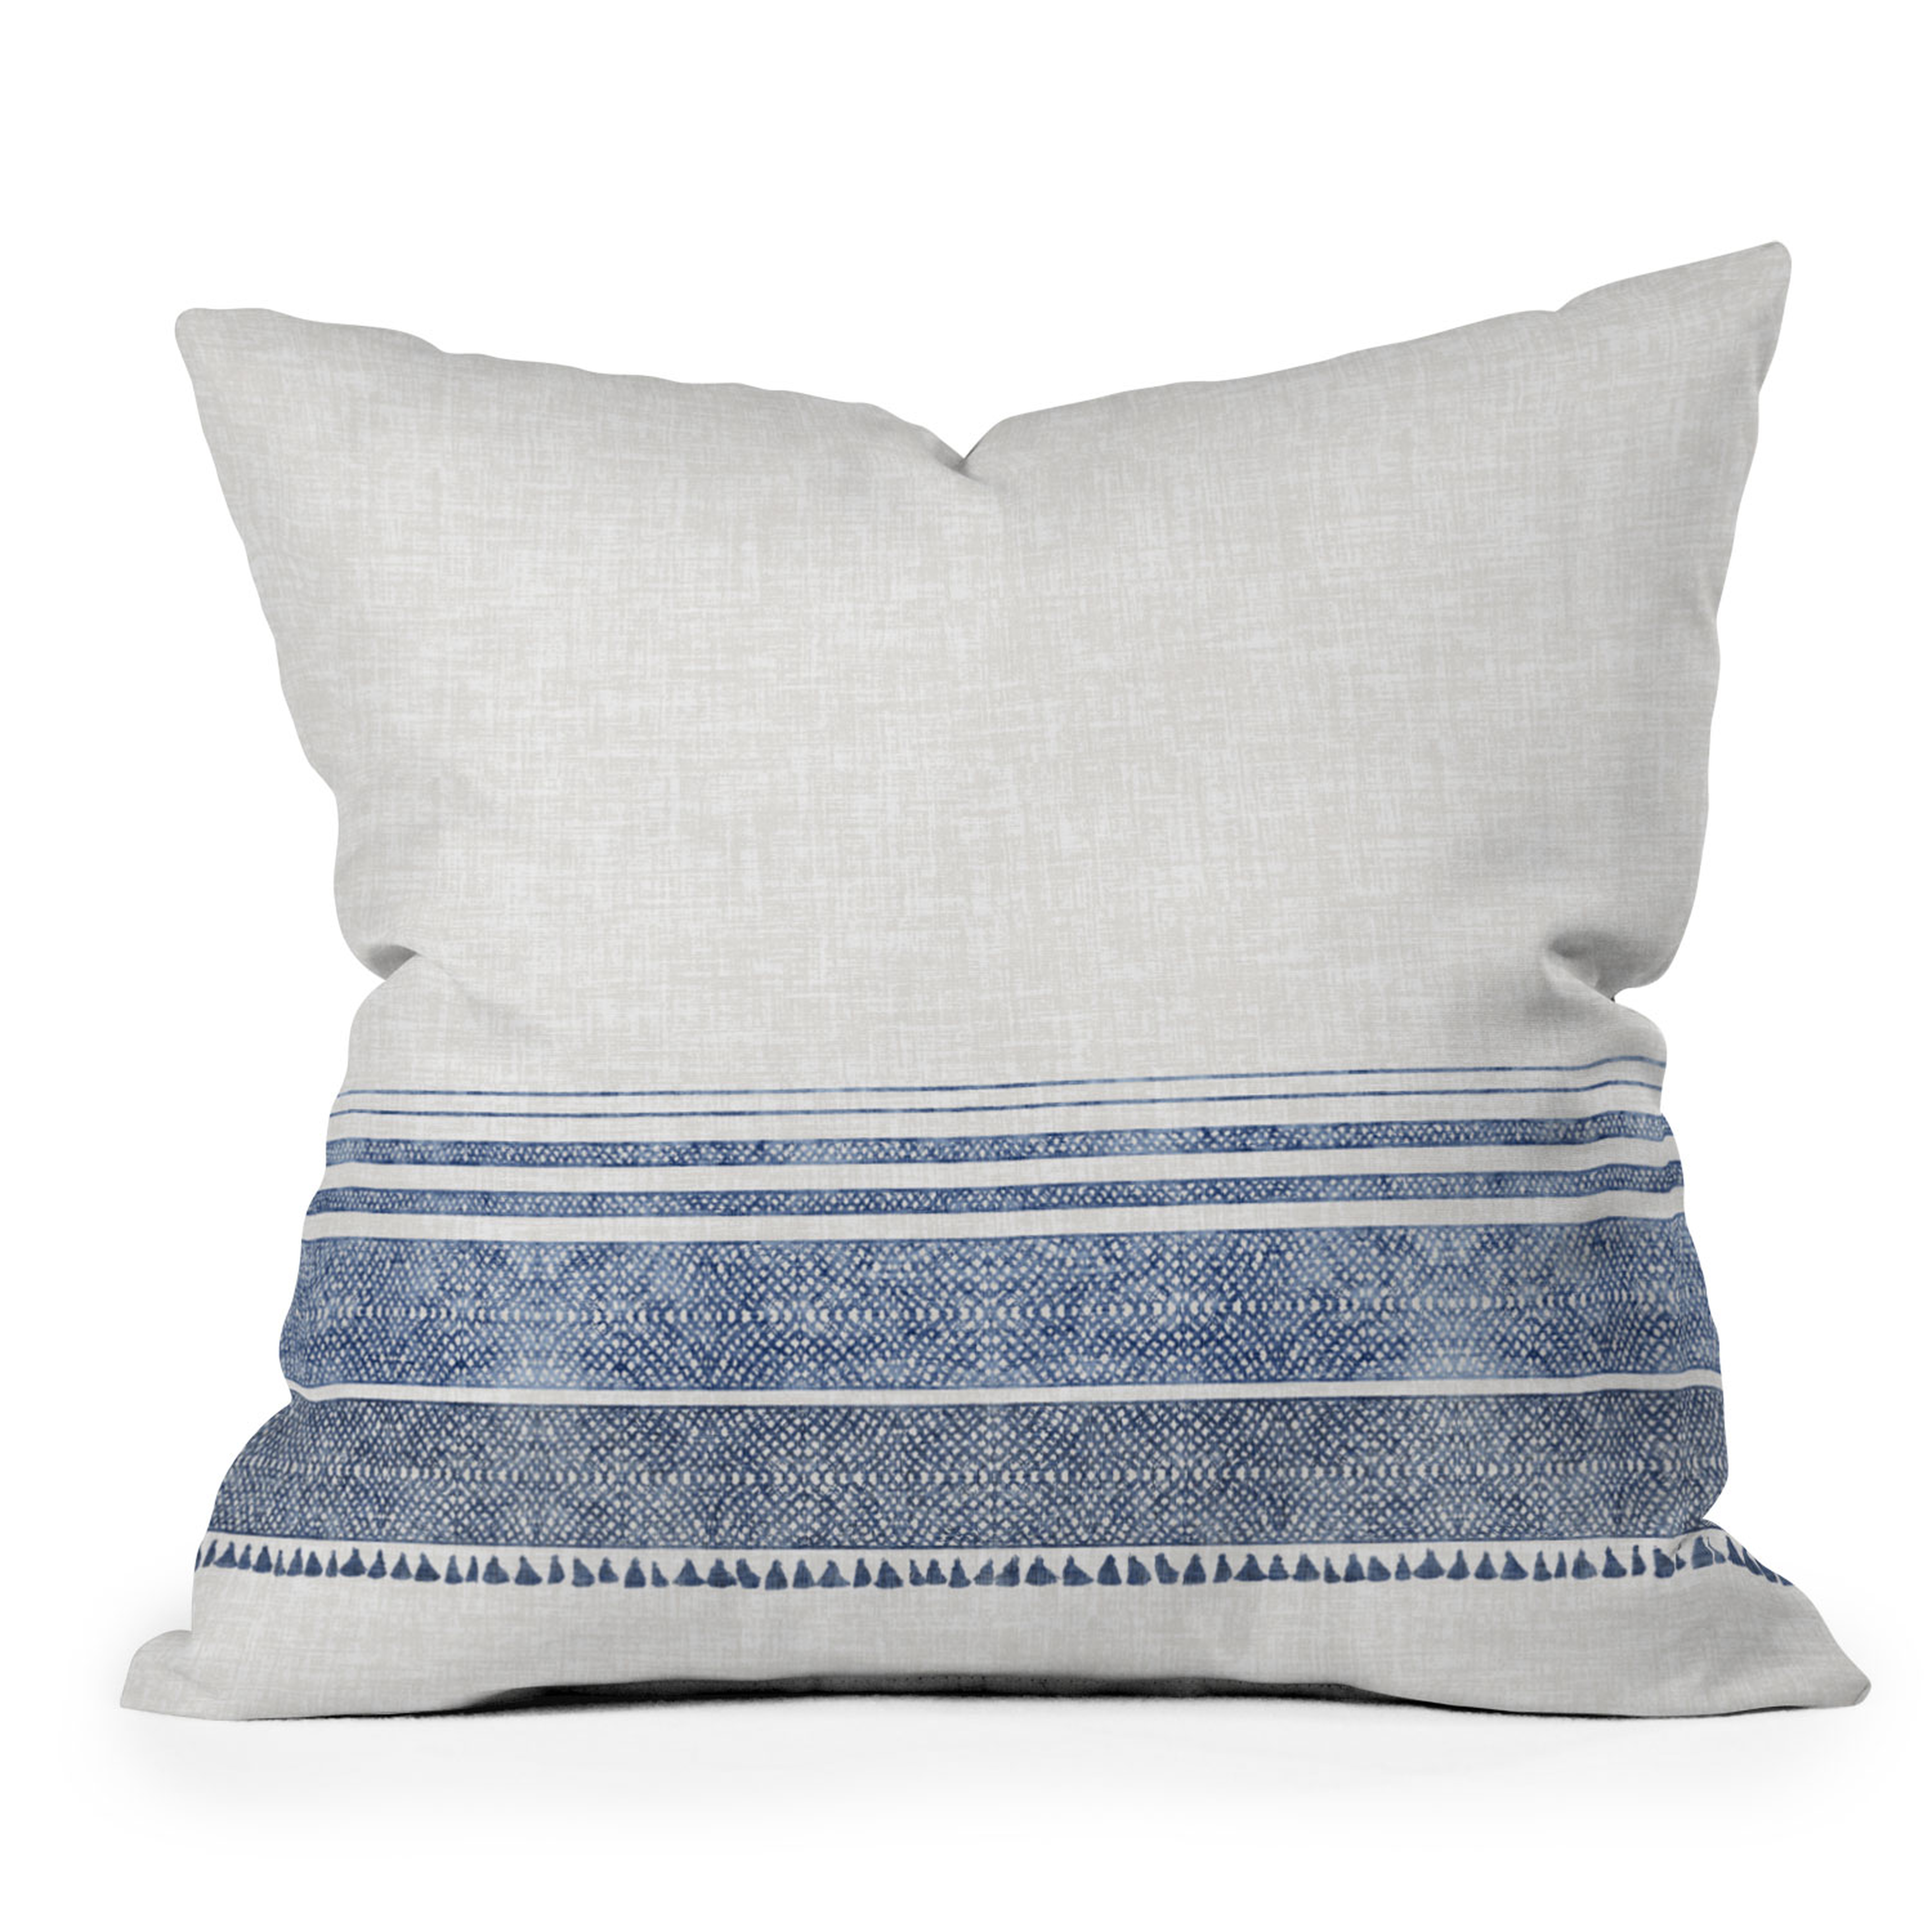 Outdoor Throw Pillow, French Linen Chambray Tassel, 16" x 16" - Wander Print Co.